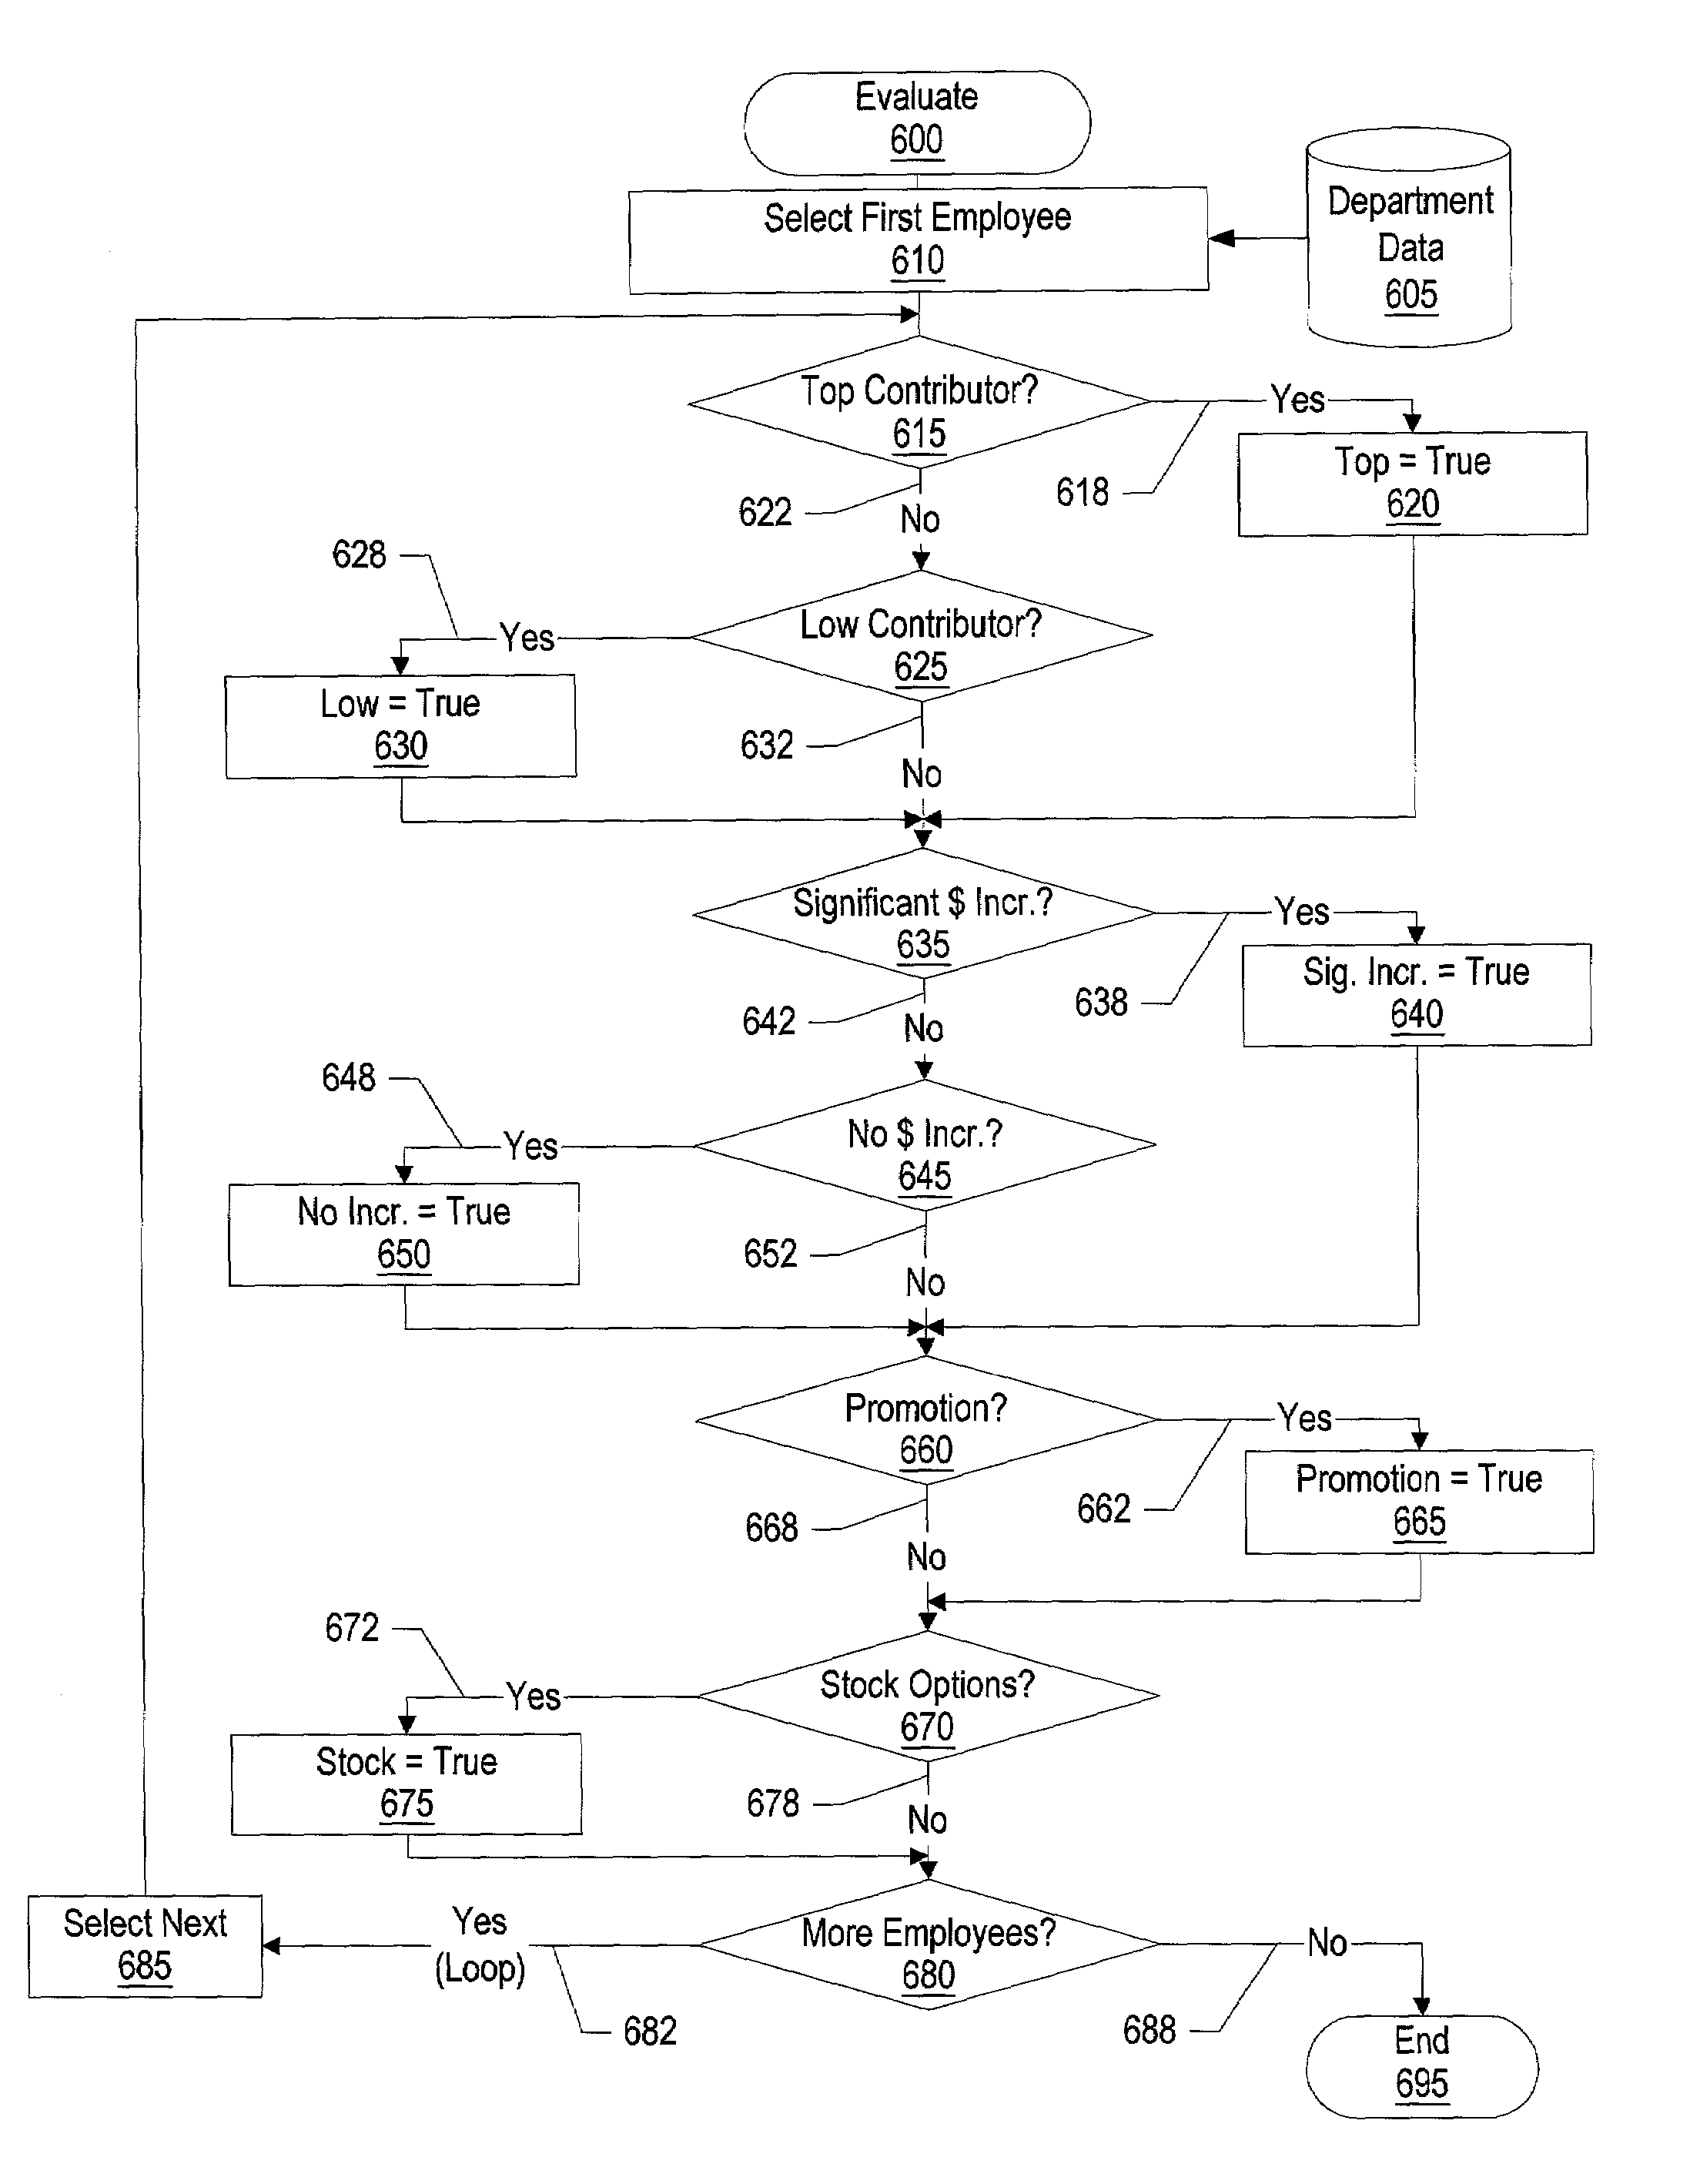 System and method for organizational risk based on personnel planning factors